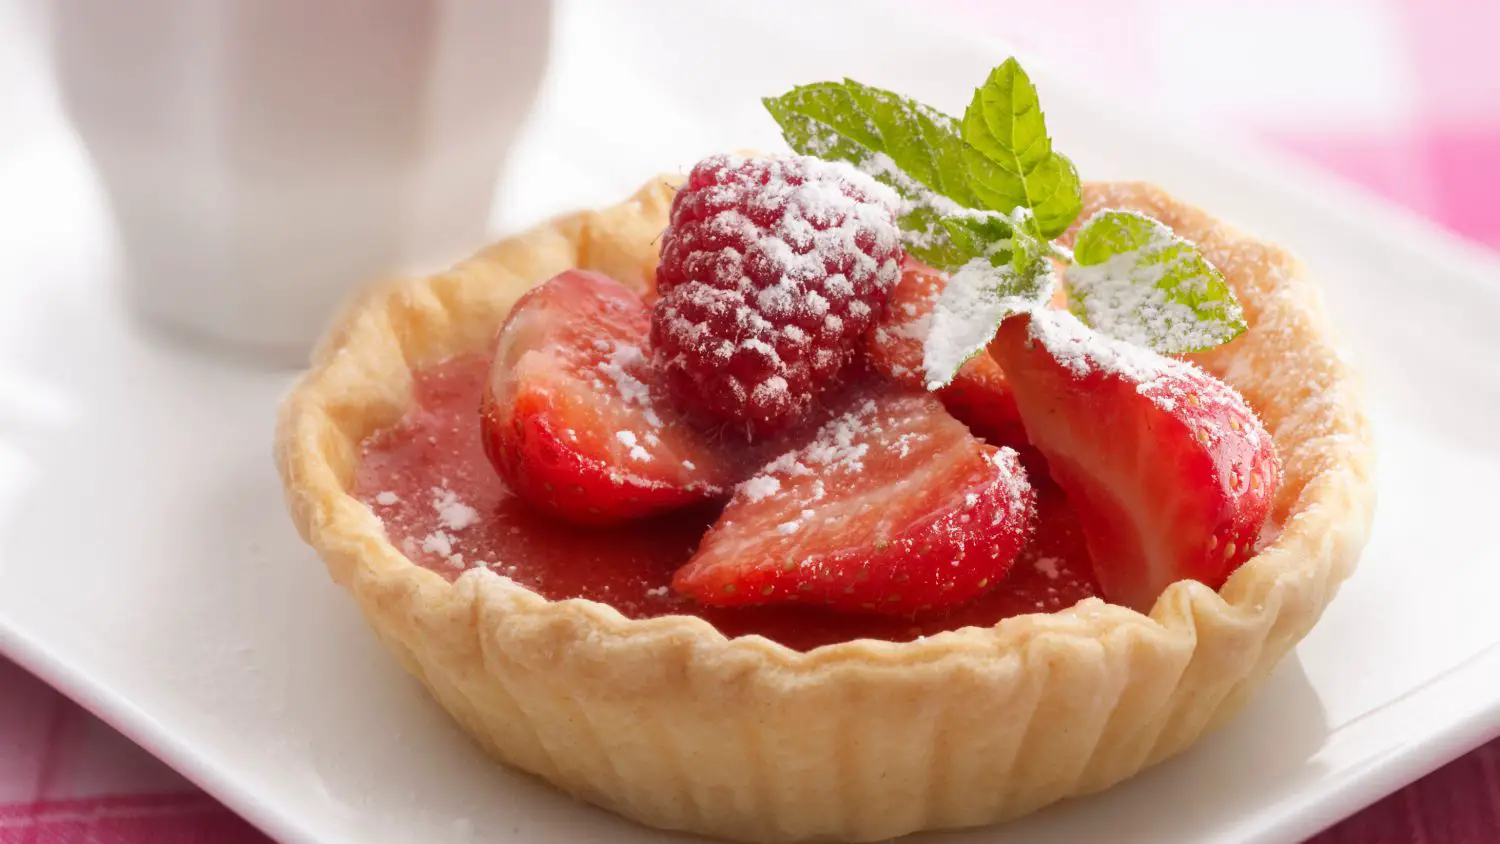 Sweet Pastry Recipe: 9 Easy Steps to Prepare it at Home